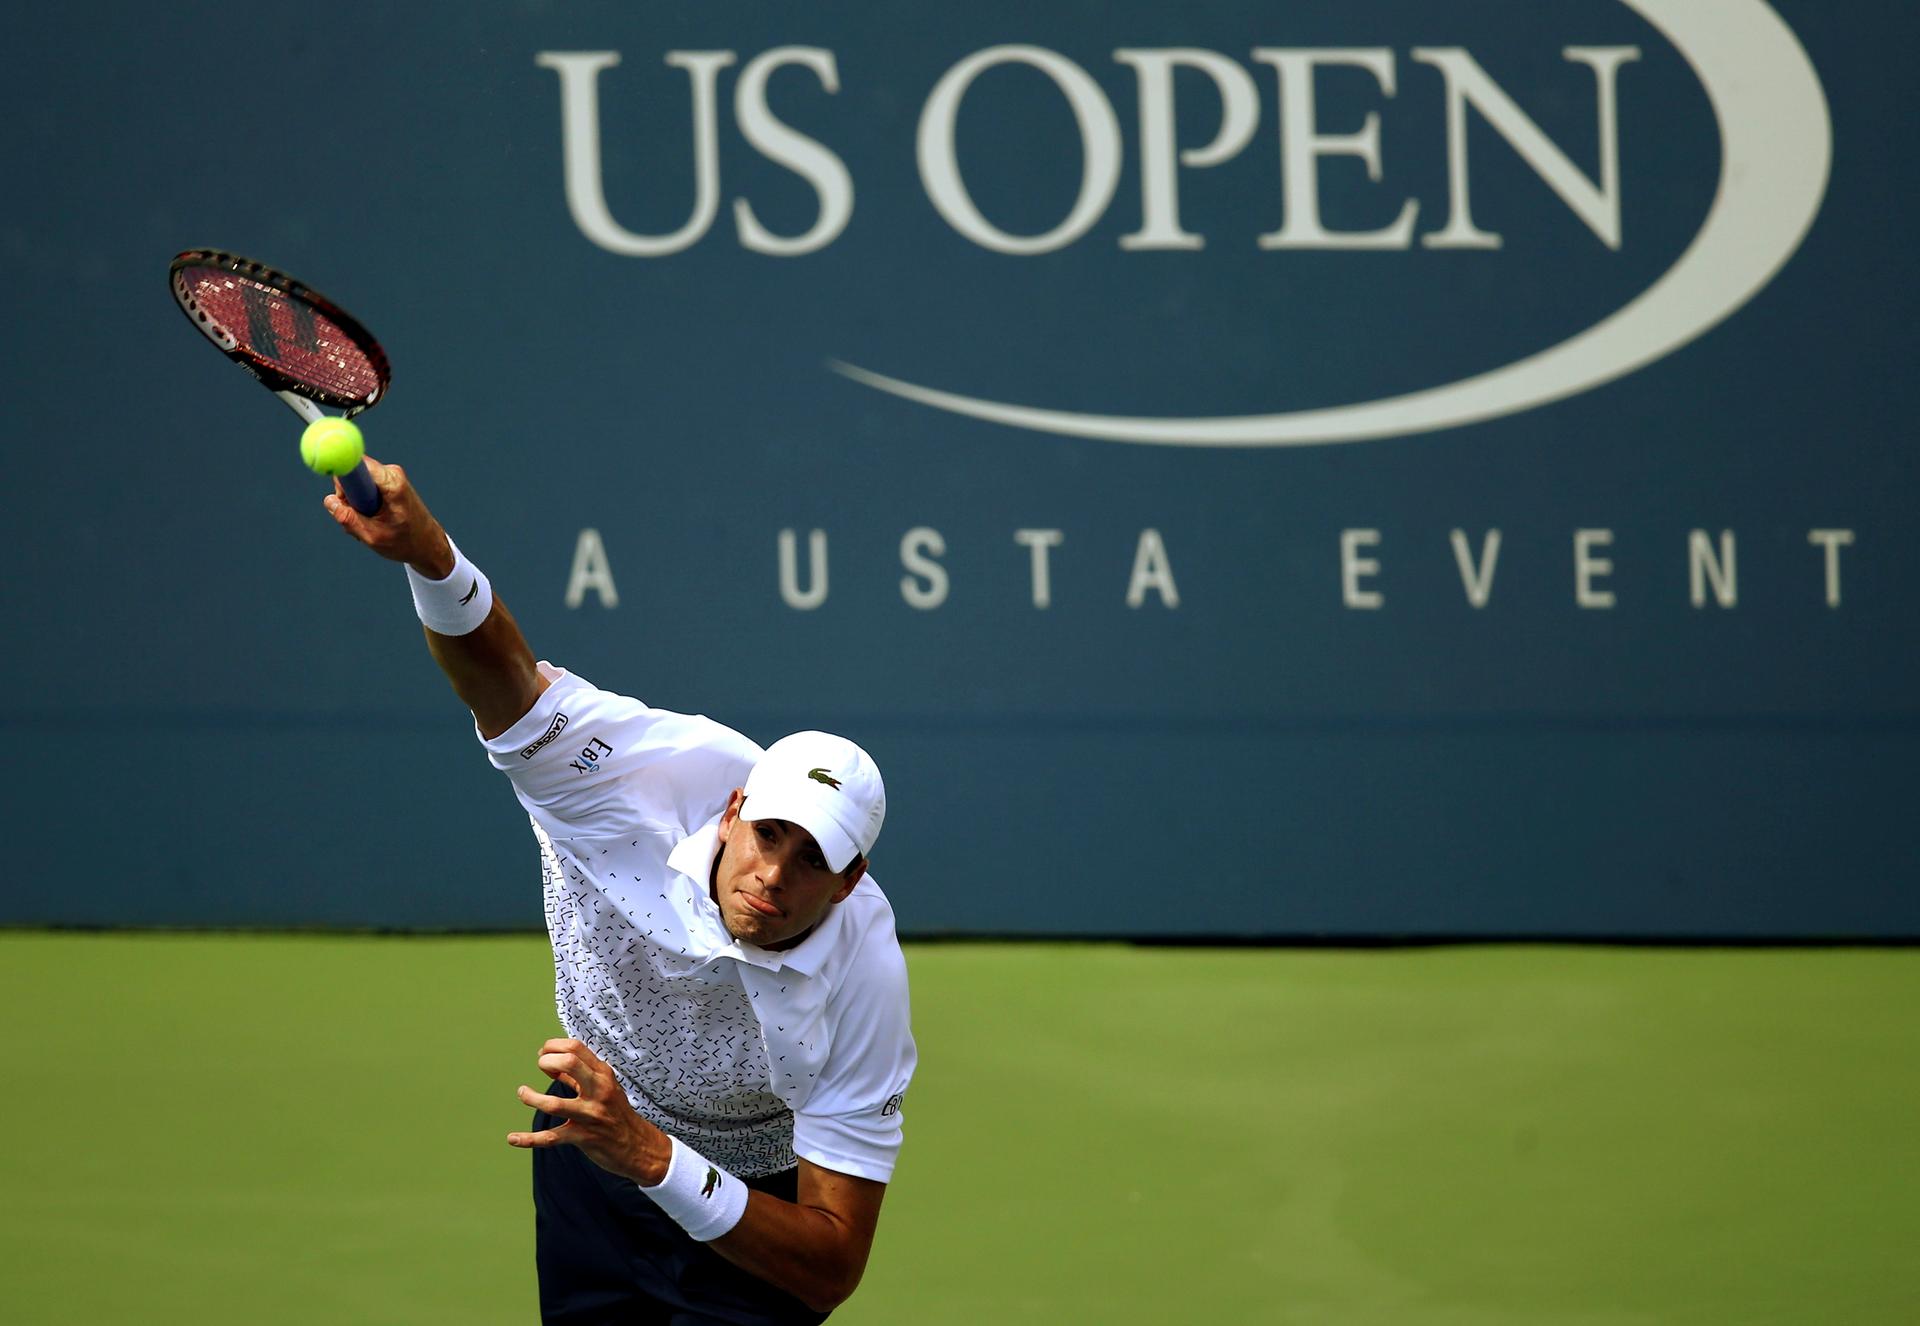 American John Isner serves during a match at the 2014 US Open. Isner is only one of two Americans among the top 50 men's players, and has never appeared in the final of a major tournament.